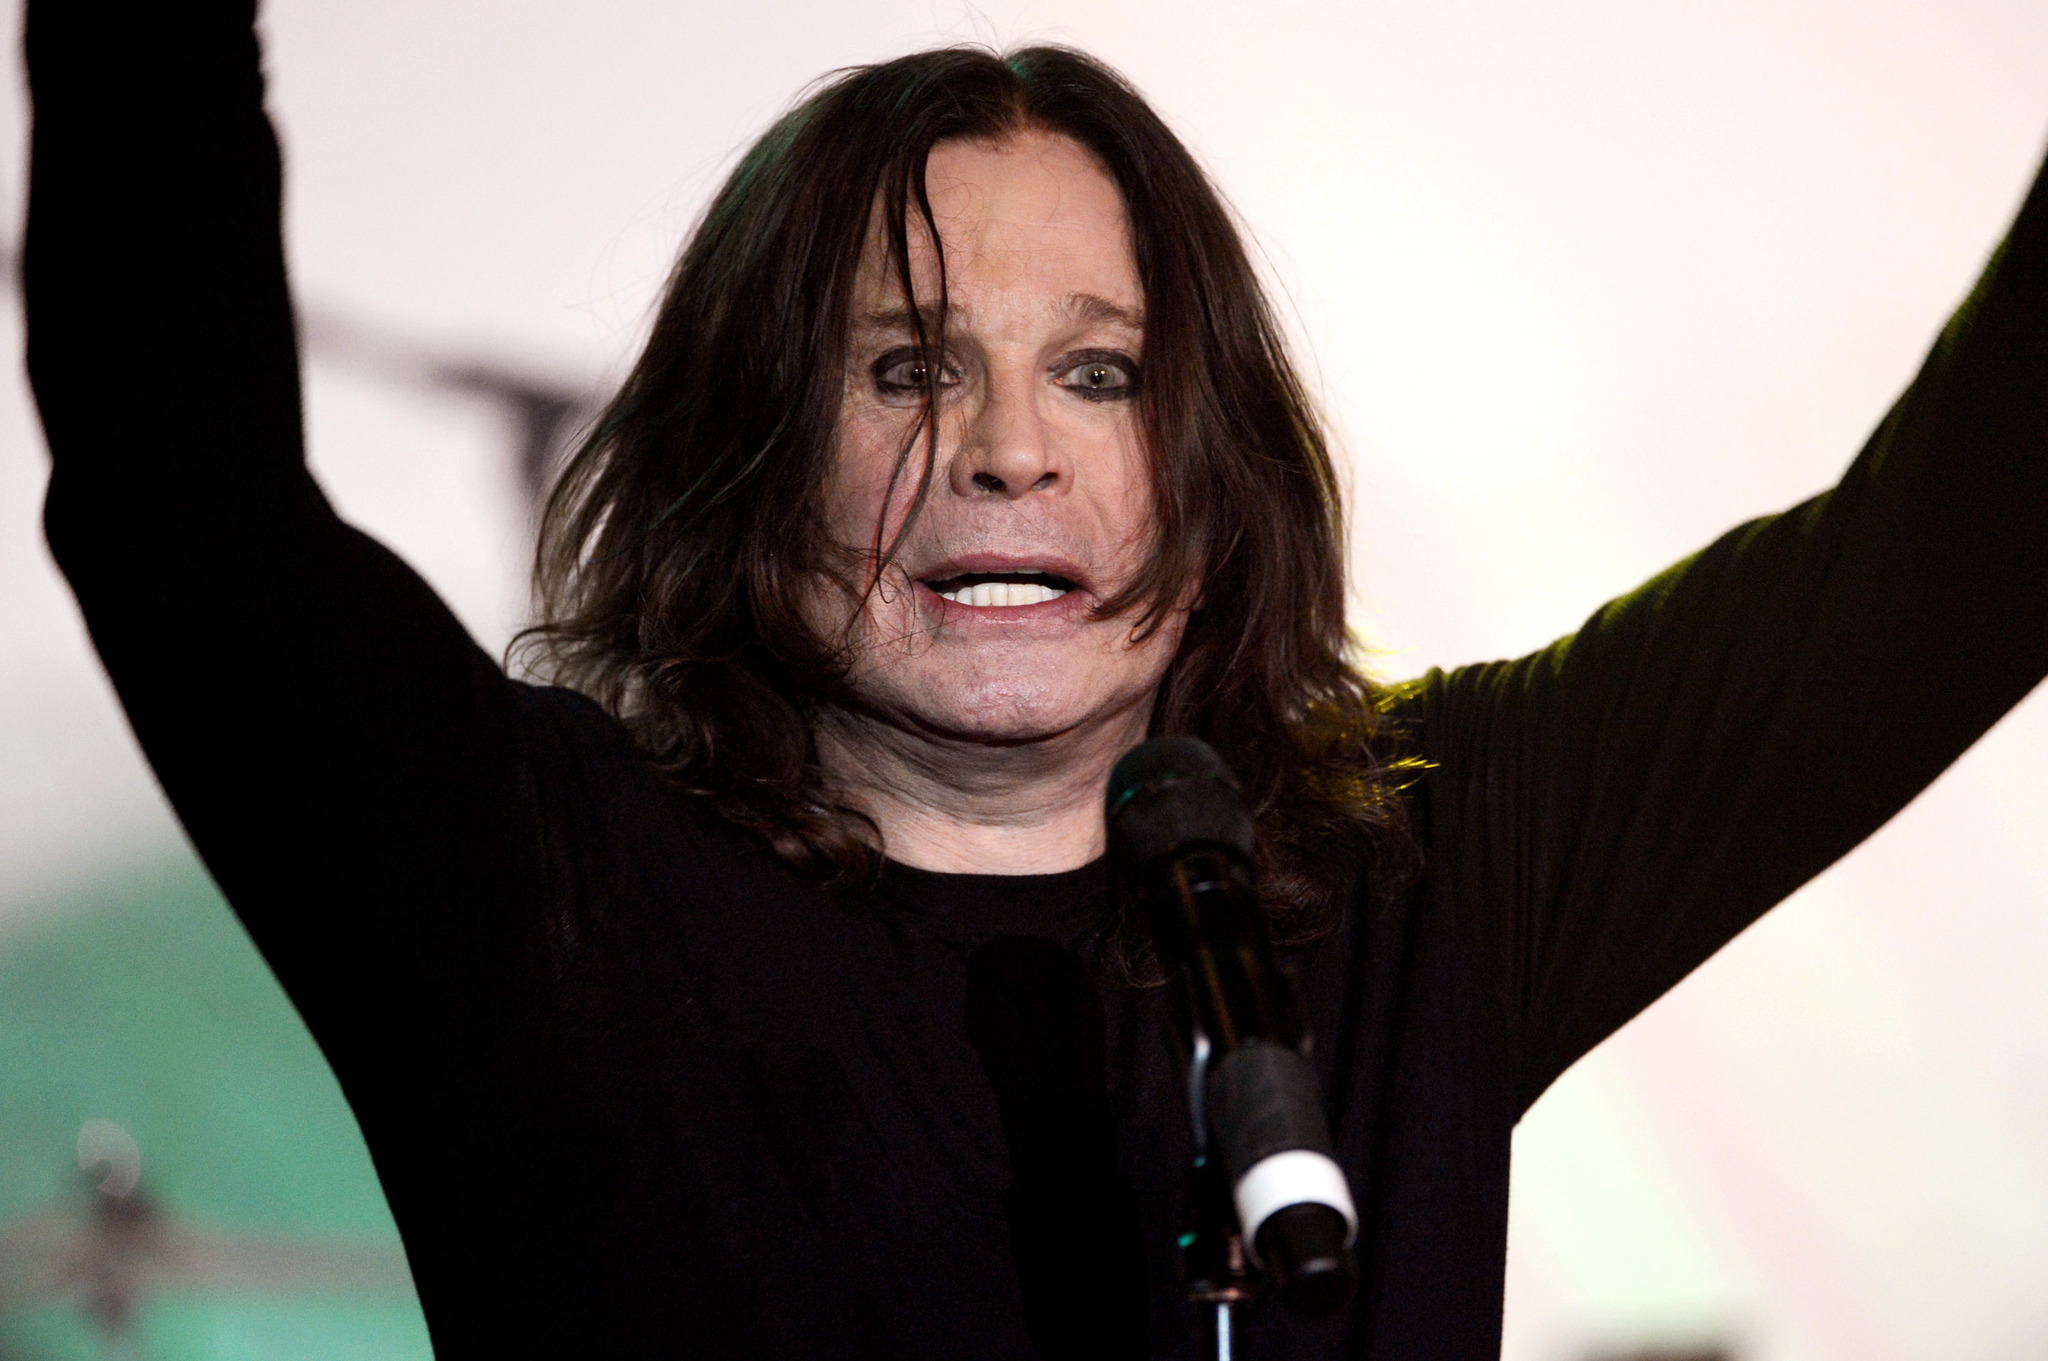 OZZY DAY Interview – His Buddy brought the Bat!